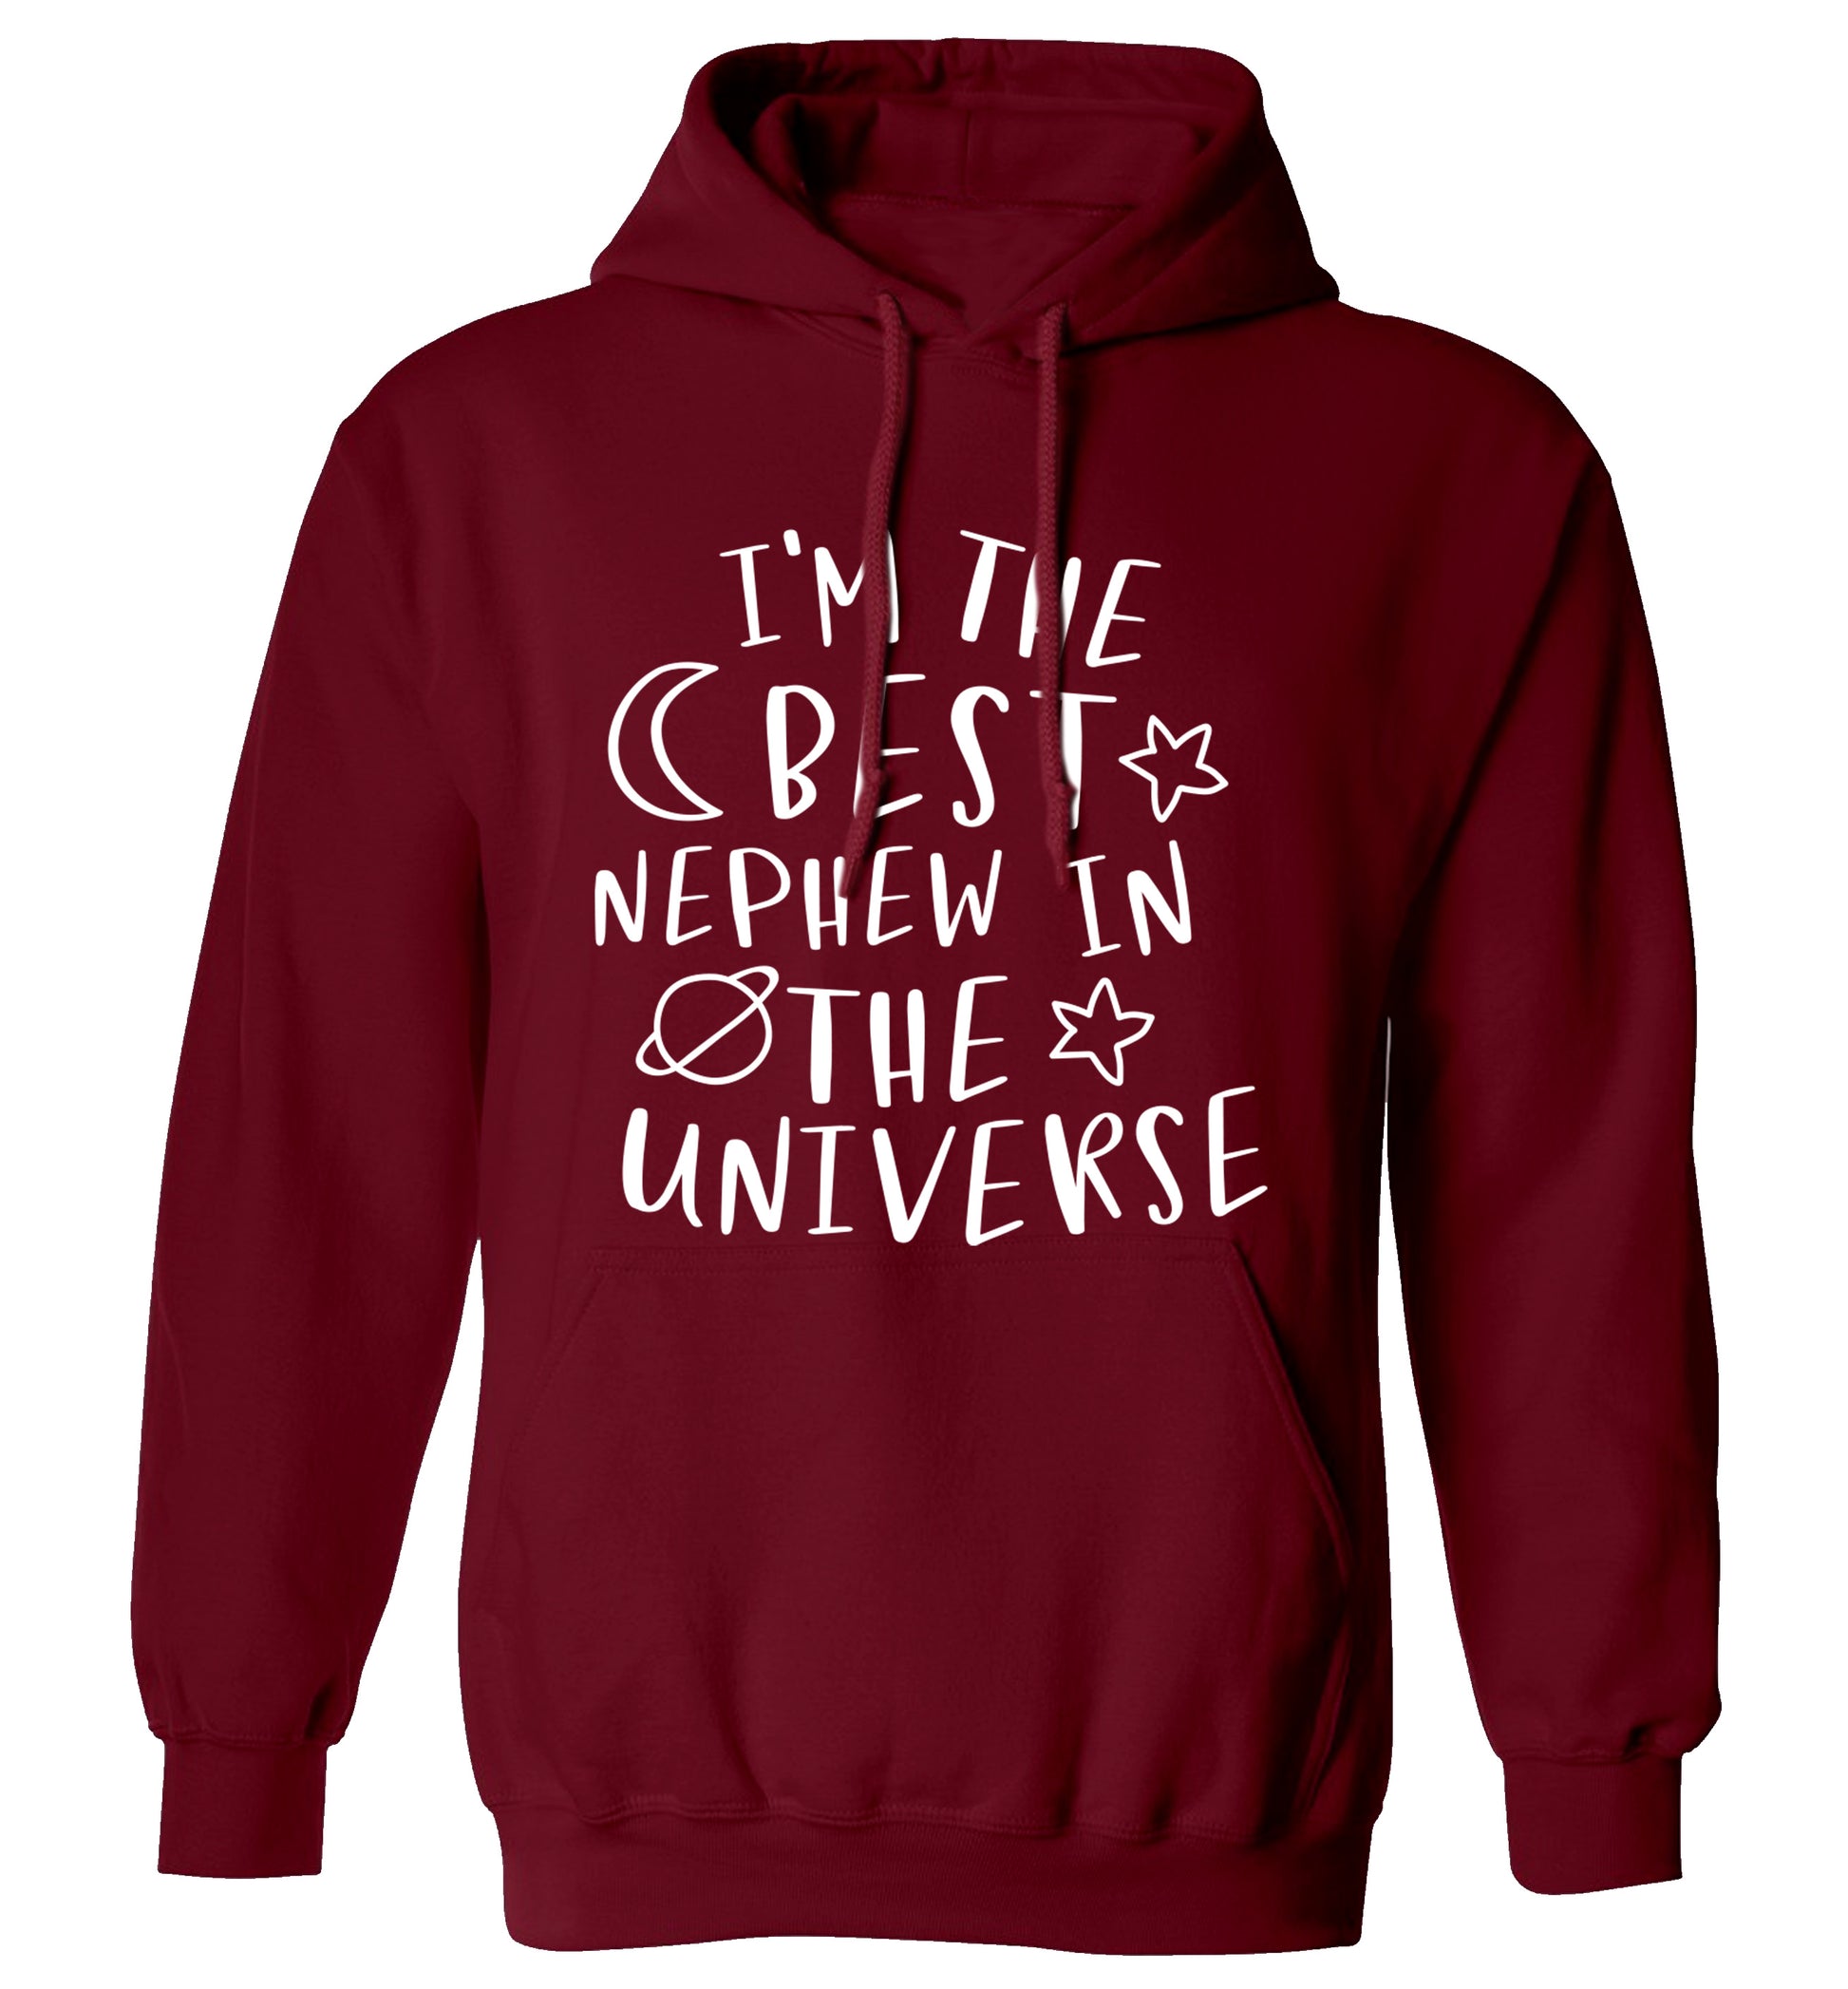 I'm the best nephew in the universe adults unisex maroon hoodie 2XL